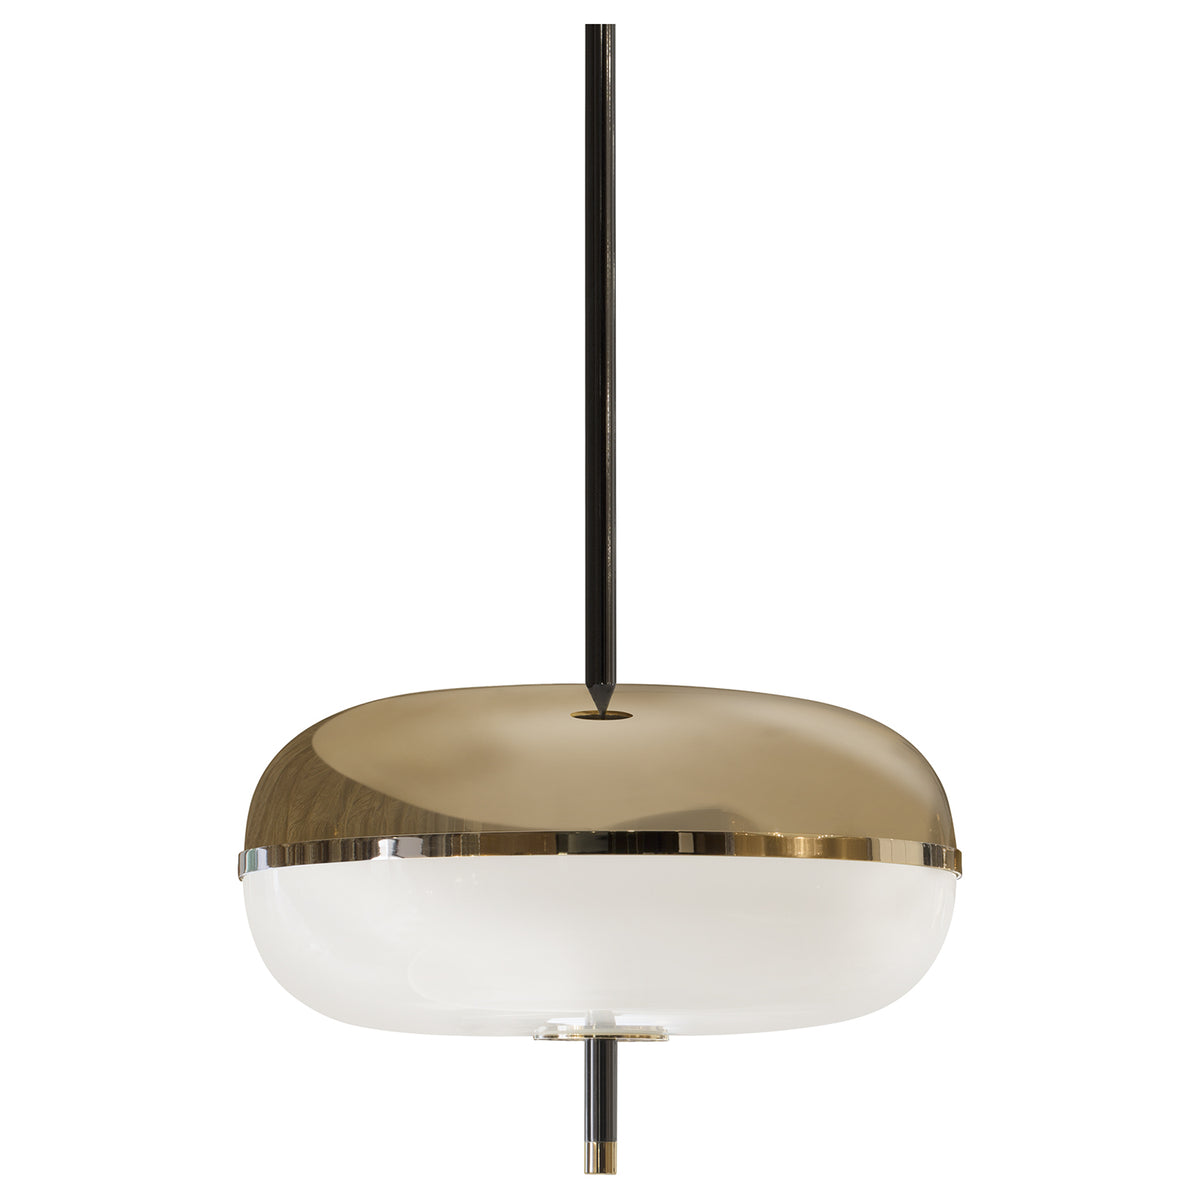 Elegant Ceiling Lamp available in different finishes